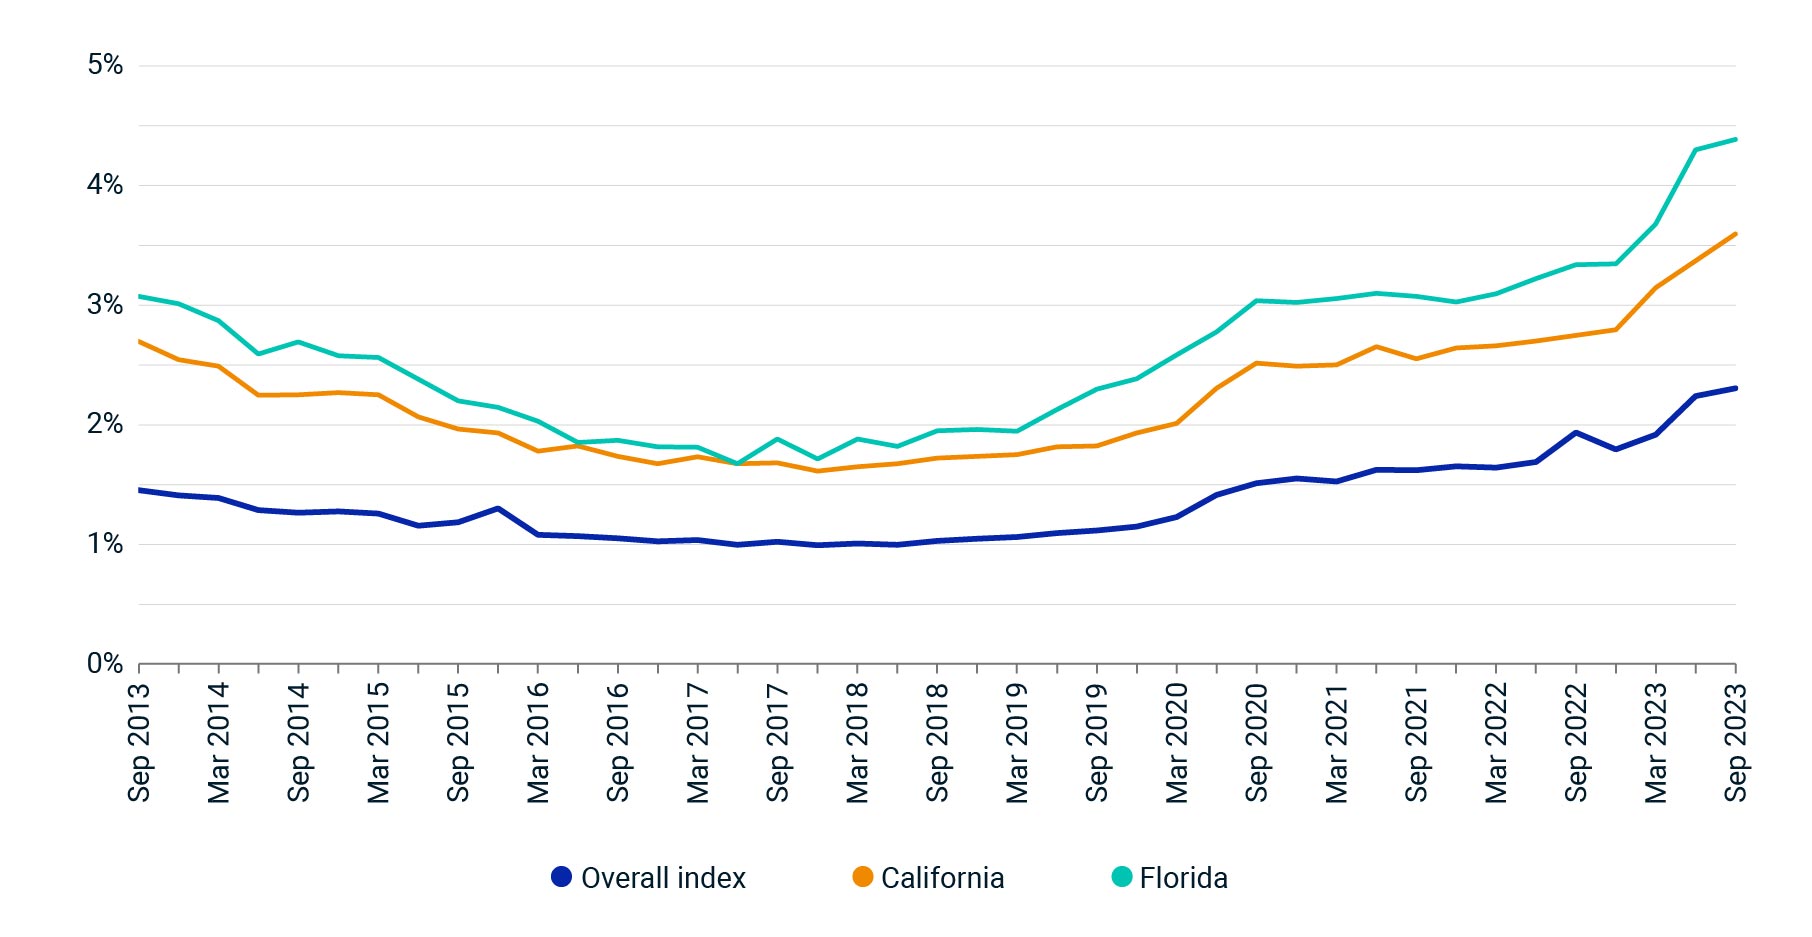 This line graph shows insurance costs as a share of income receivable for properties in the MSCI U.S. Quarterly Property Index; lines for Florida and California are also shown.